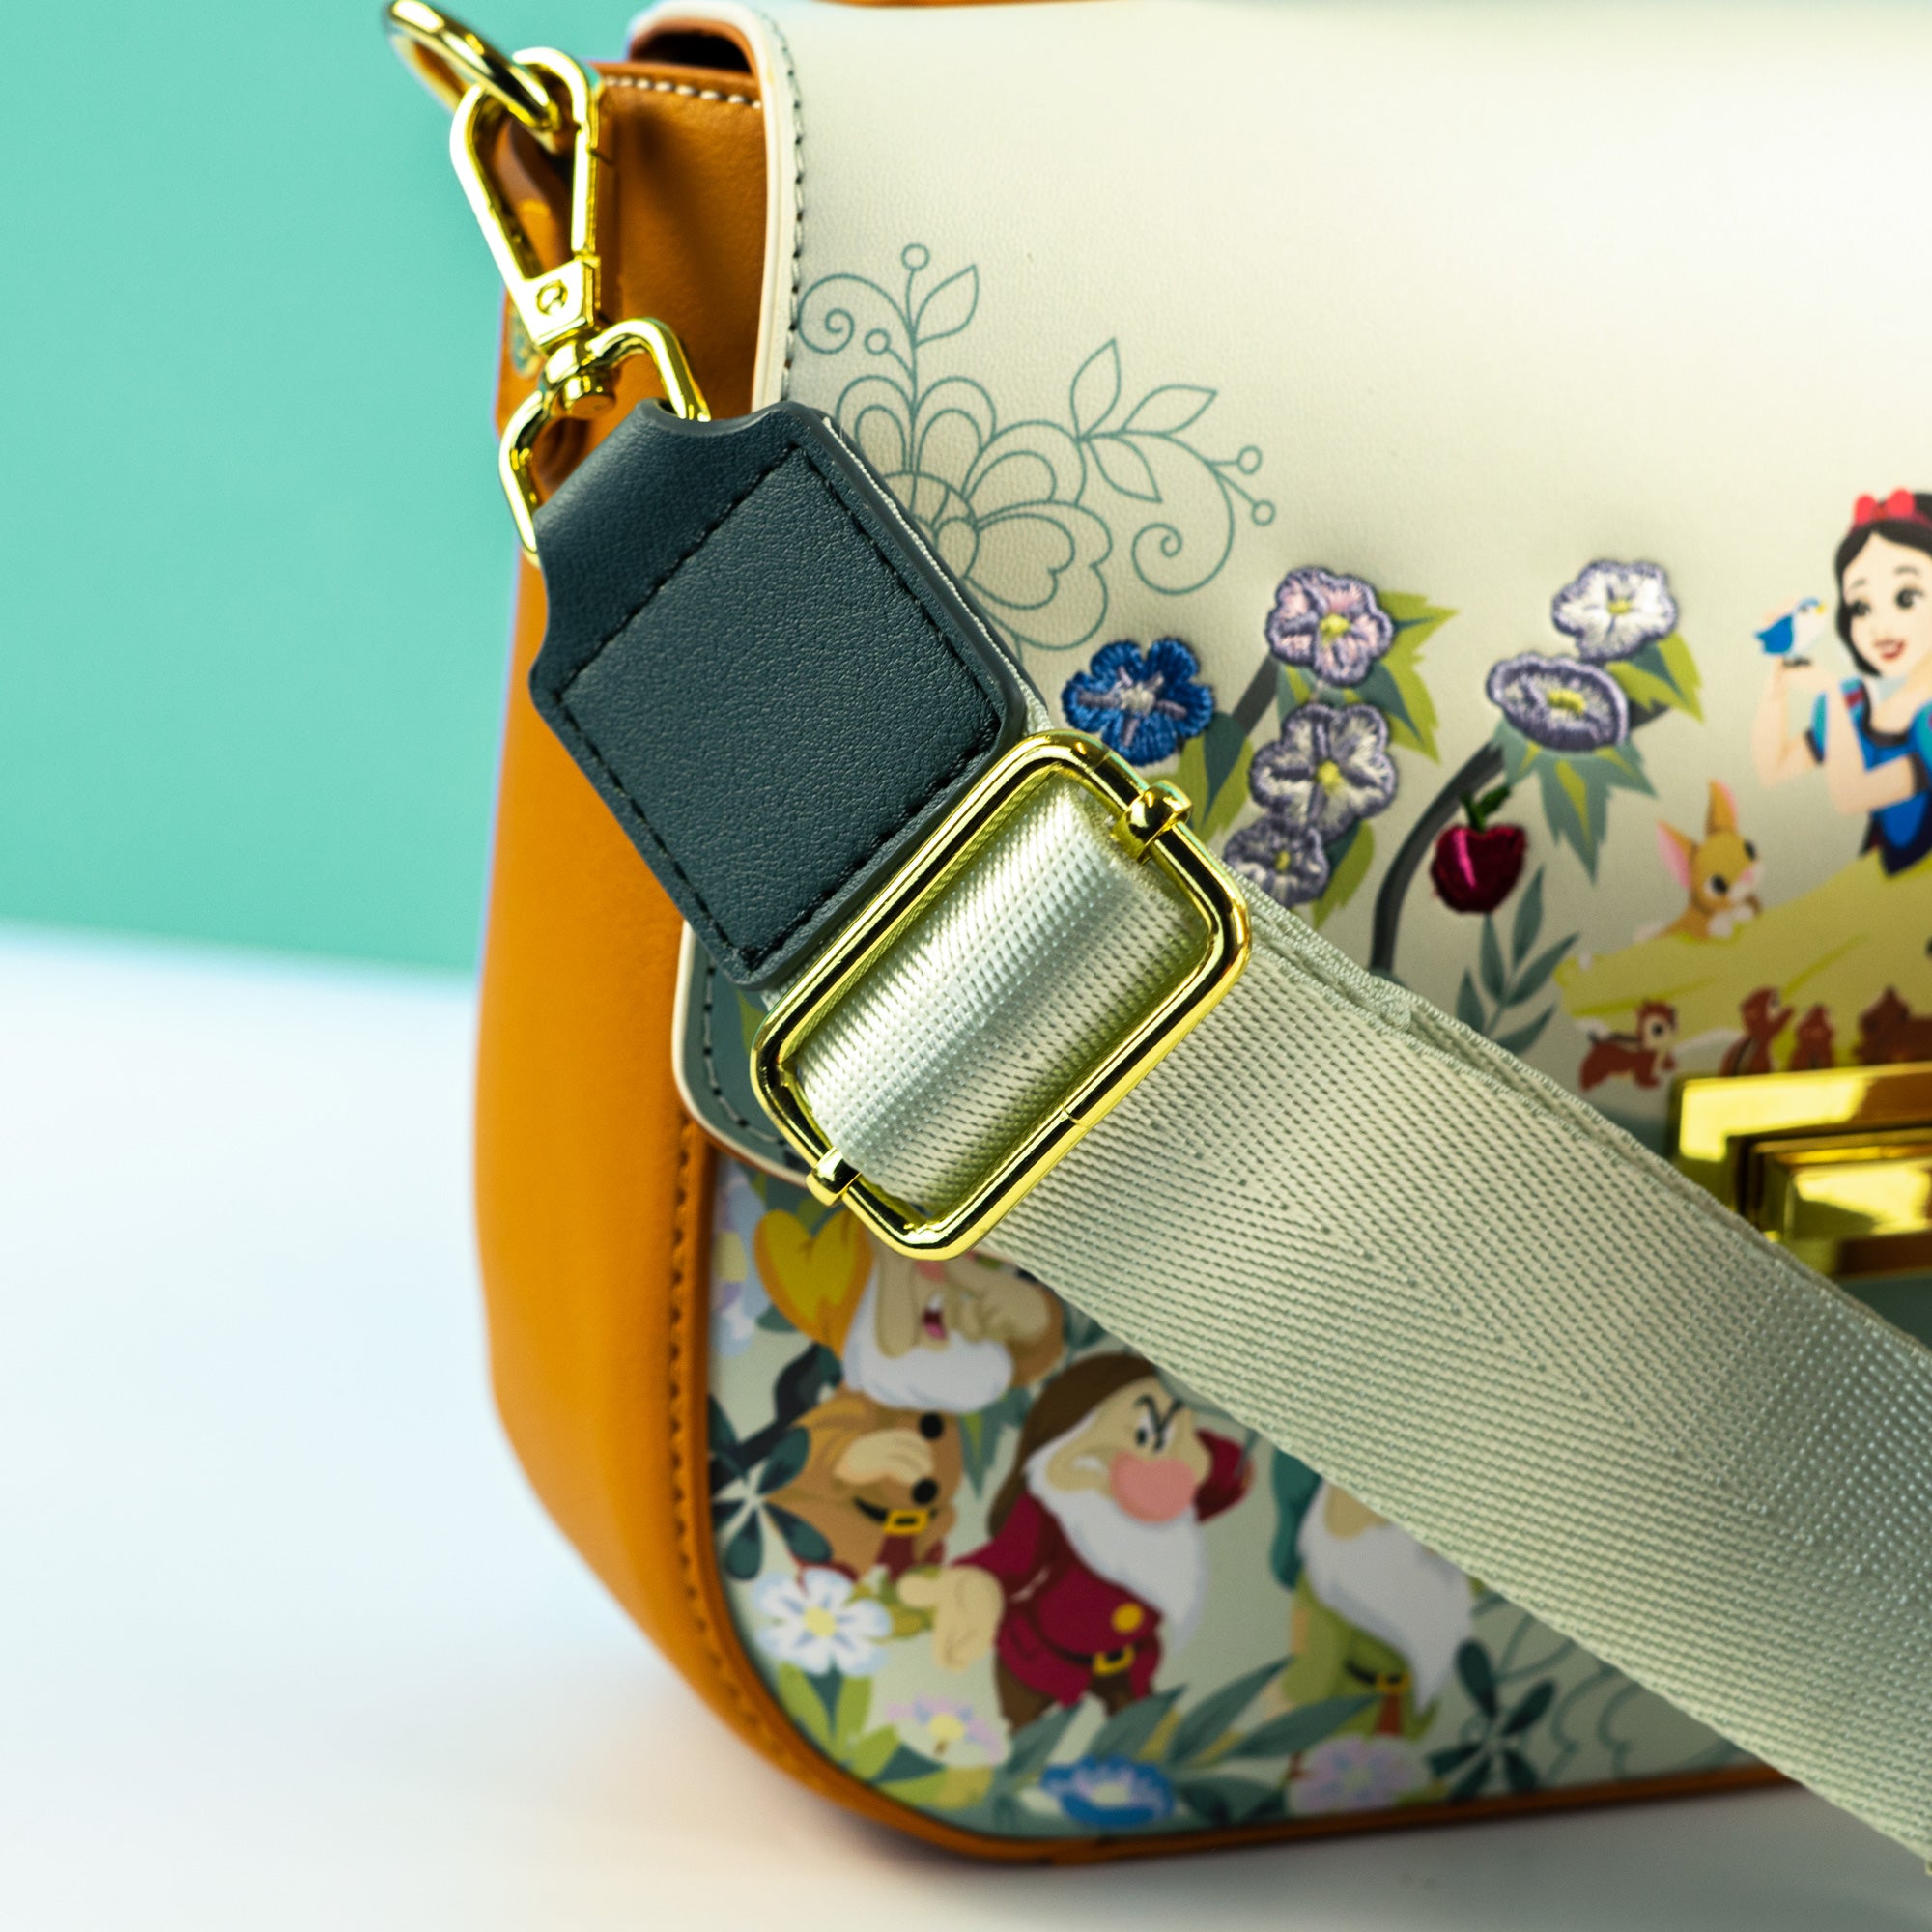 Loungefly x Disney Snow White and the Seven Dwarfs Floral Crossbody Bag